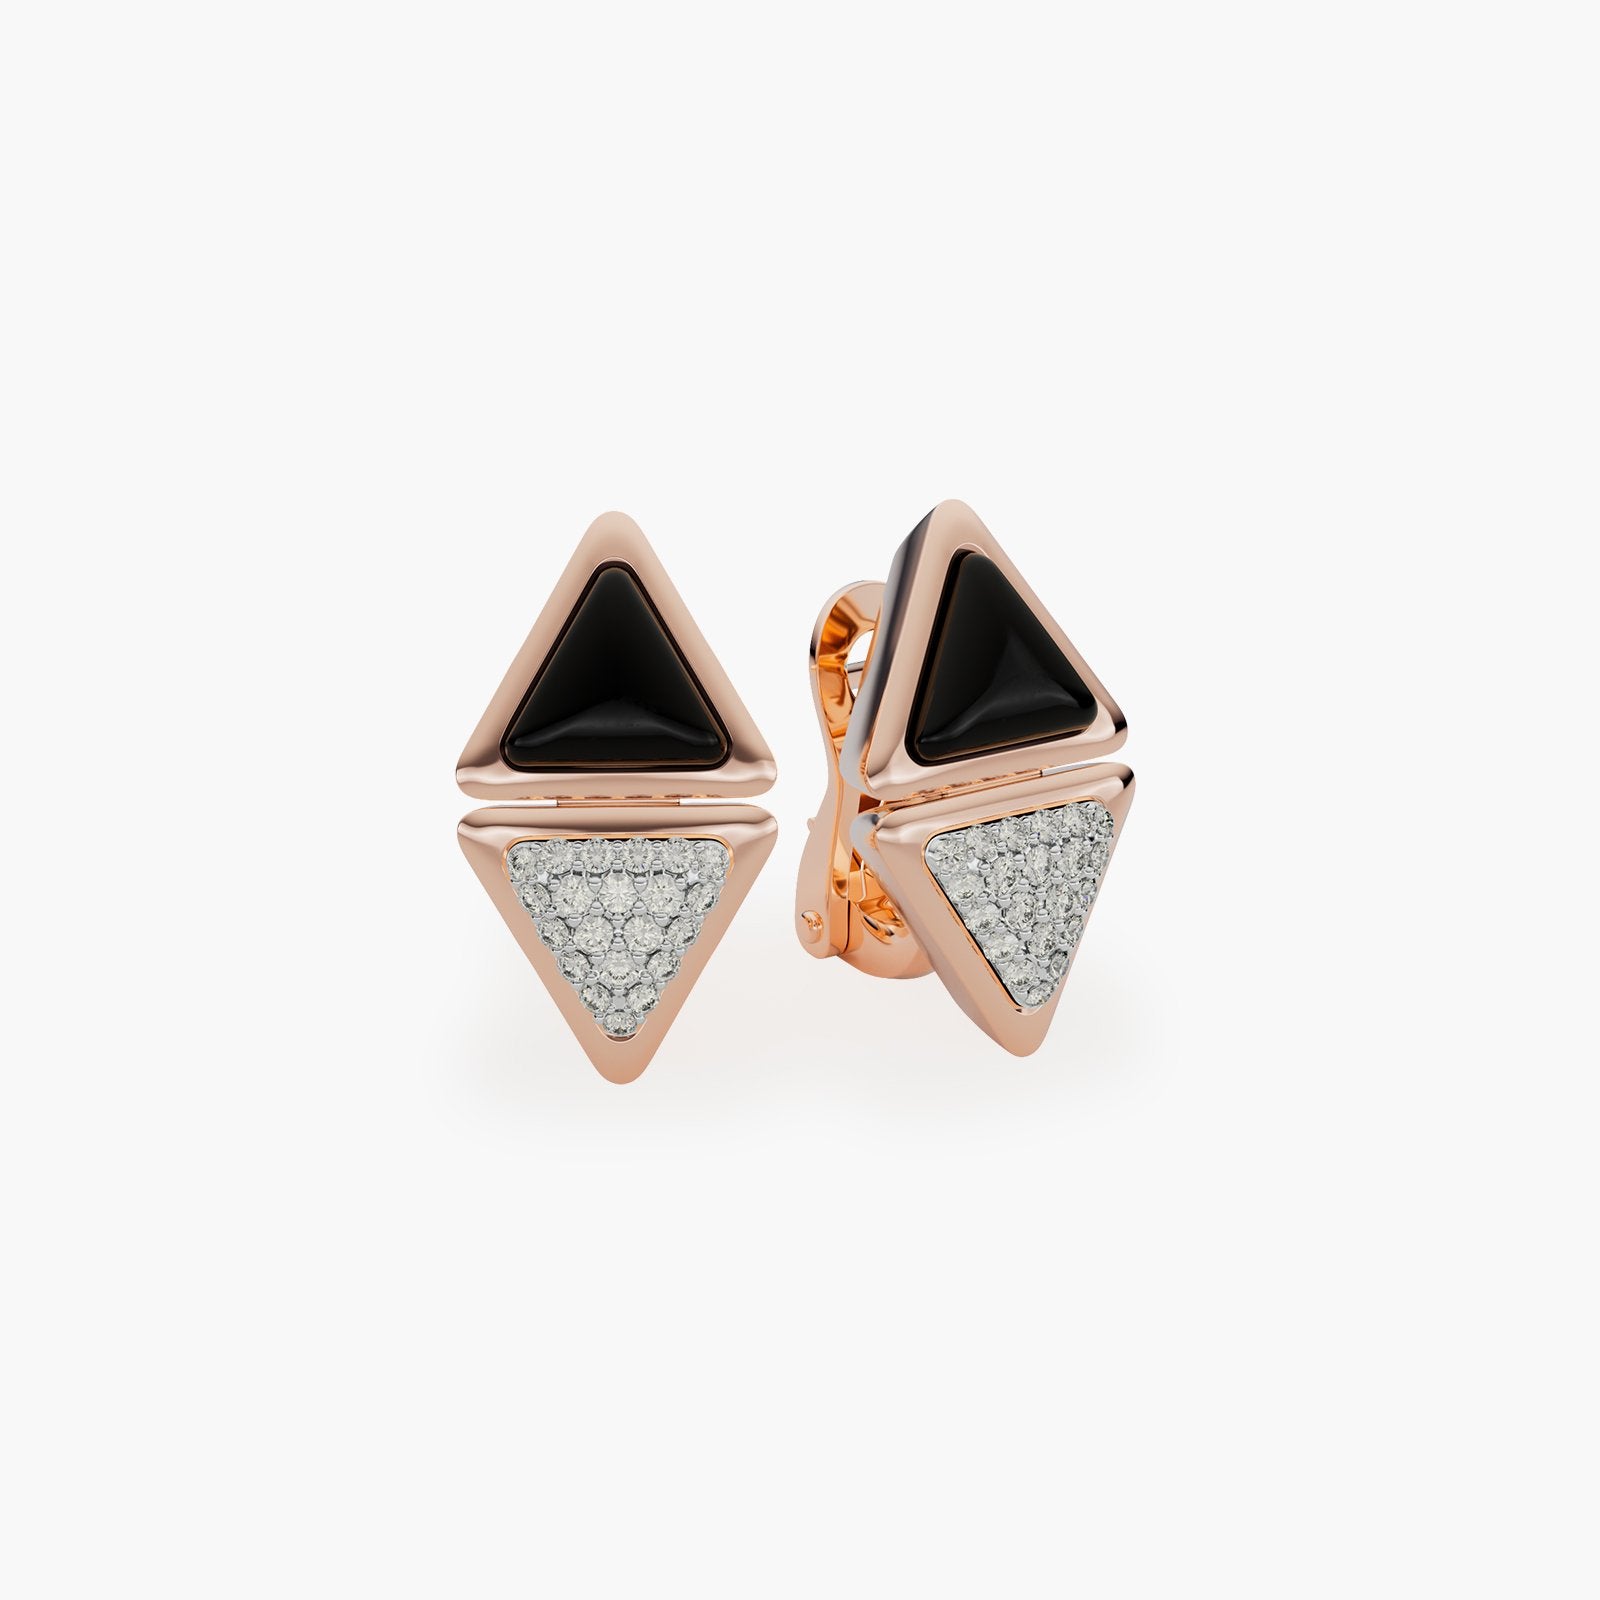 Earrings Short Mirror Exquisite Rose Gold Onix and Diamonds